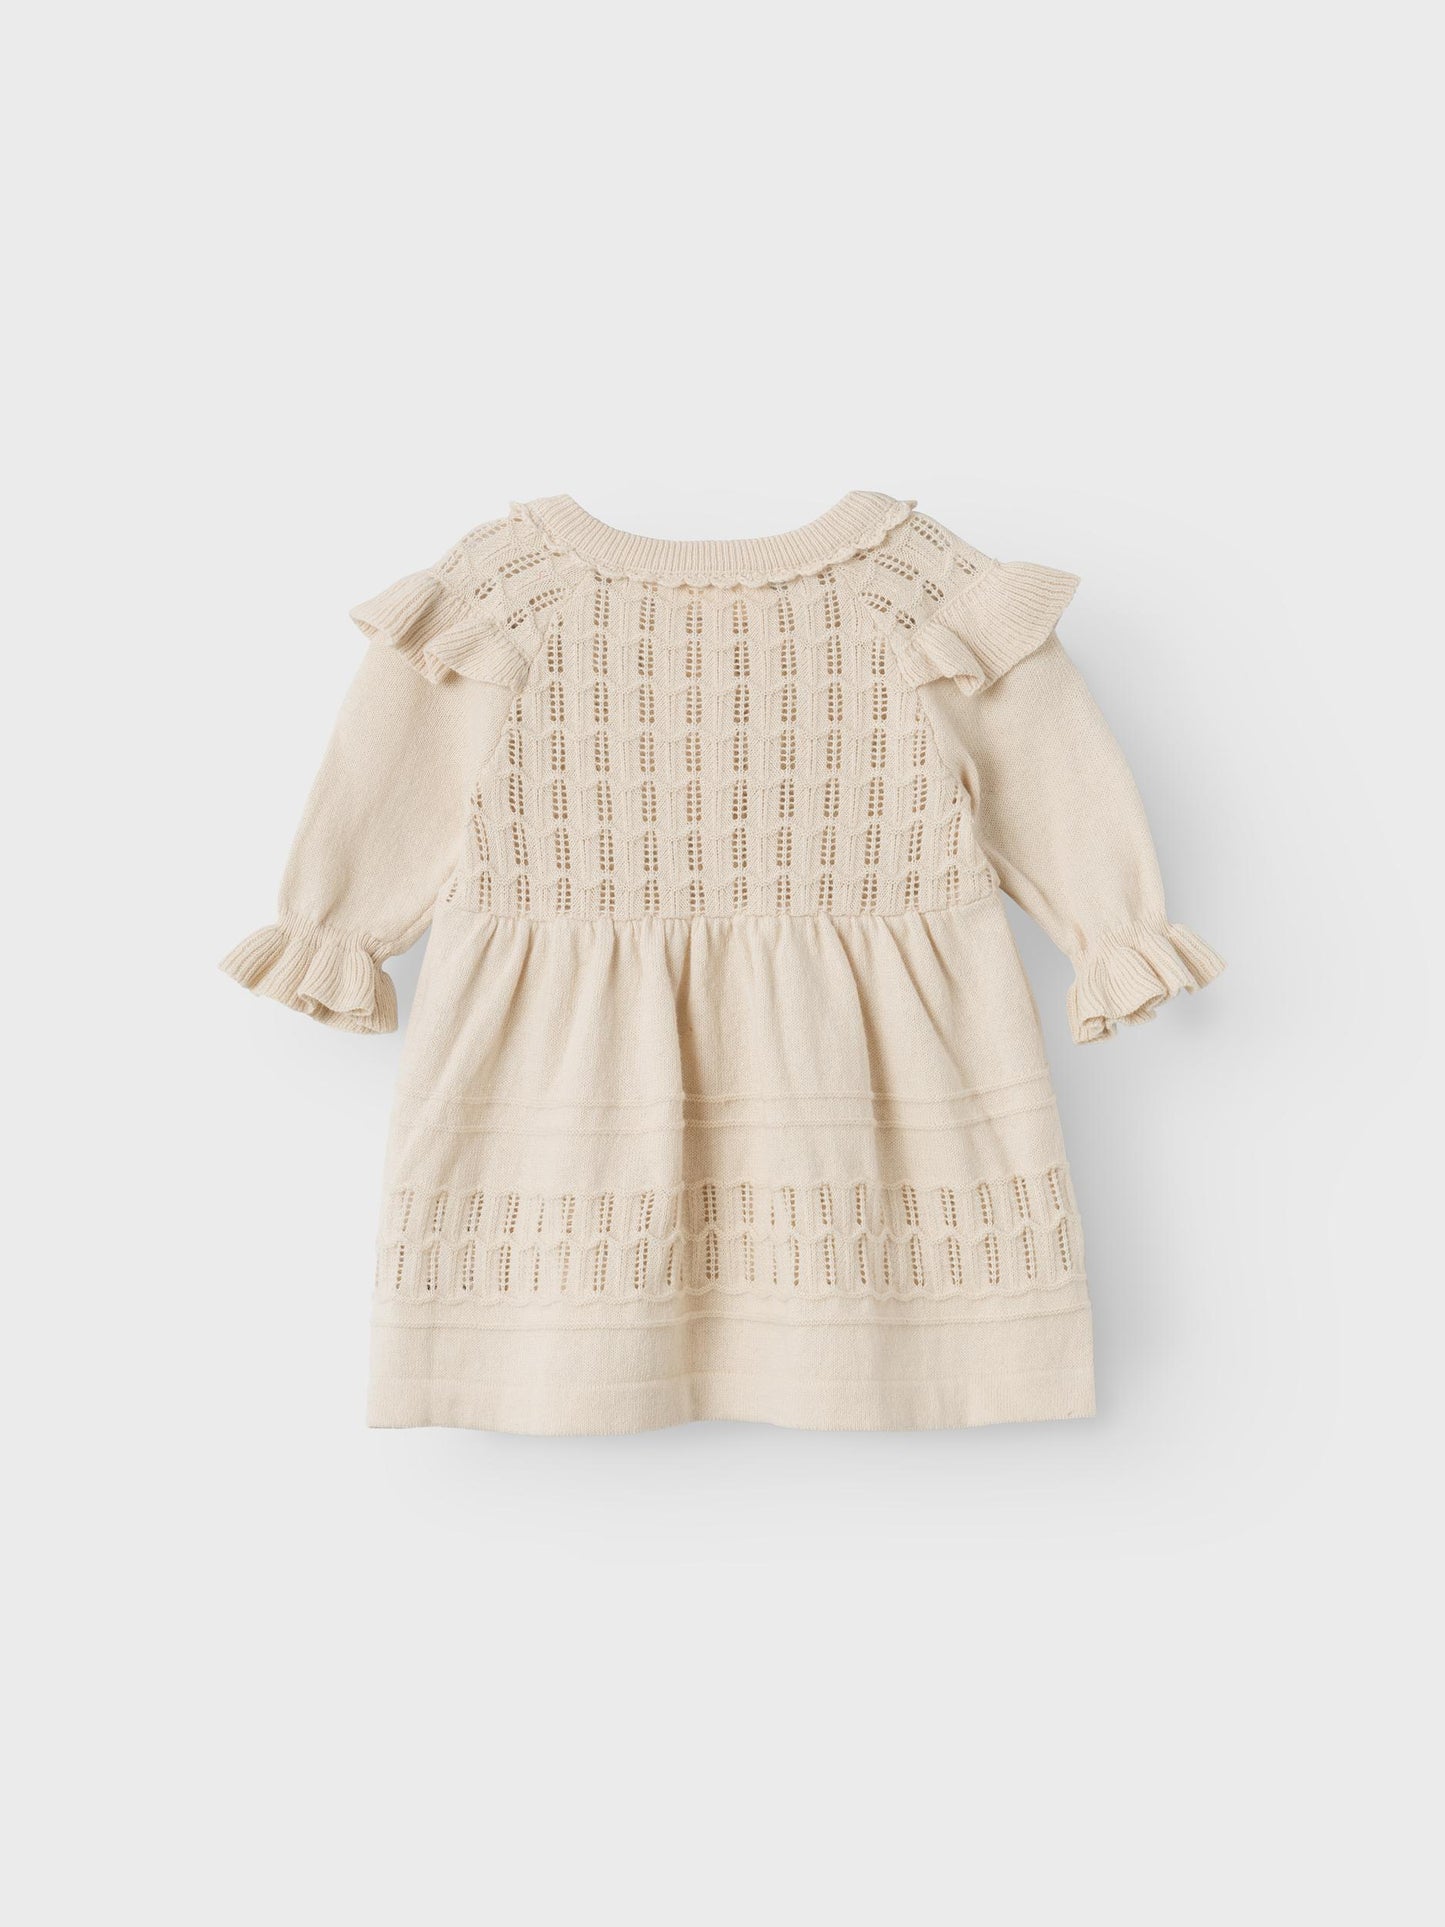 Lil Atelier Baby | Faucy knit dress - Sandshell